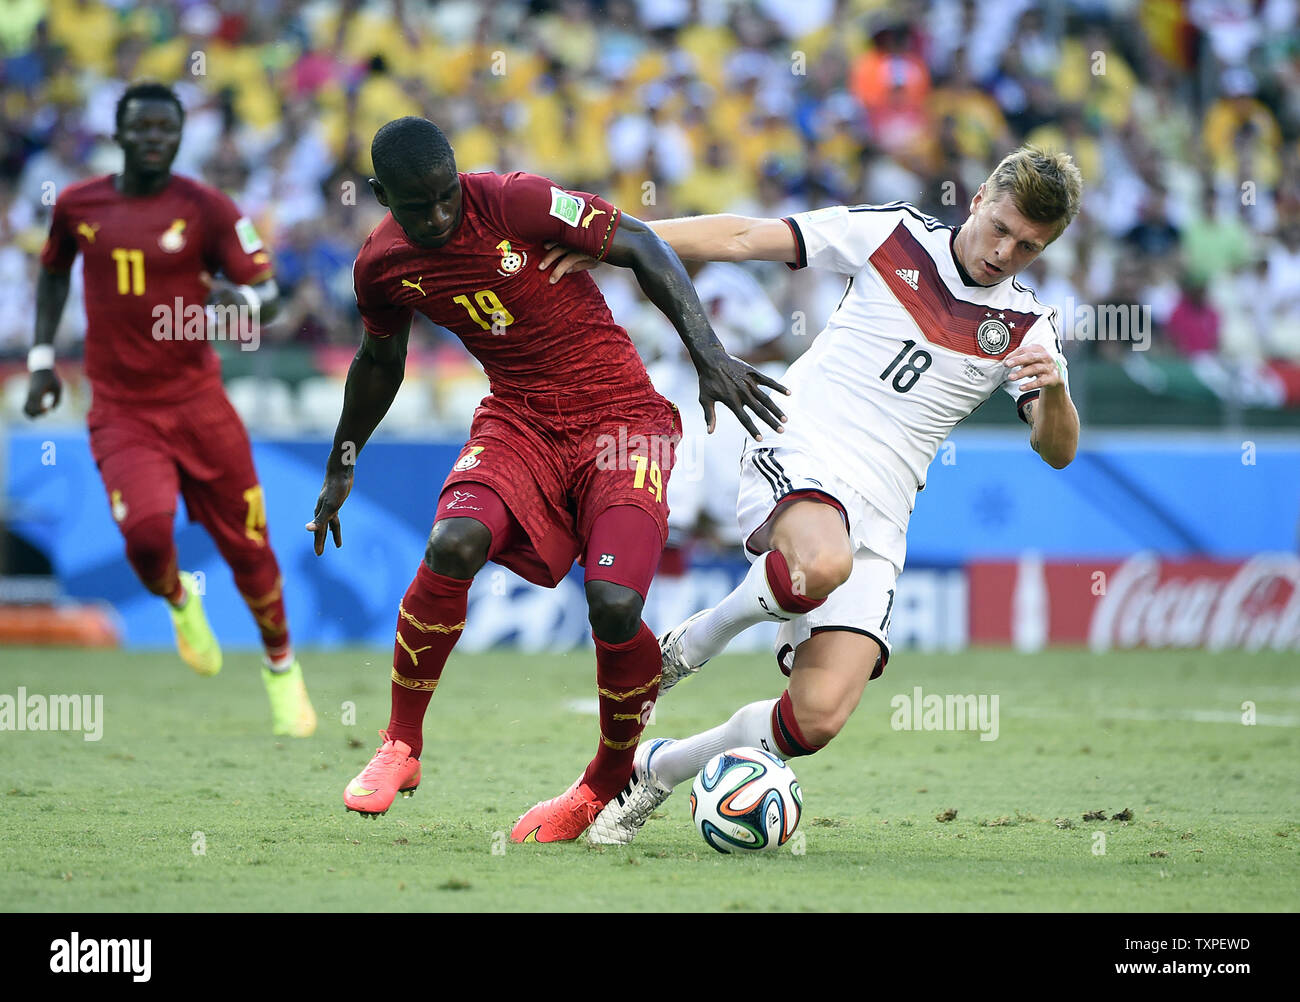 Toni Kroos of Germany competes with Jonathan Mensah (L) of Ghana during the 2014 FIFA World Cup Group G match at the Estadio Castelao in Fortaleza, Brazil on June 21, 2014. UPI/Chris Brunskill Stock Photo